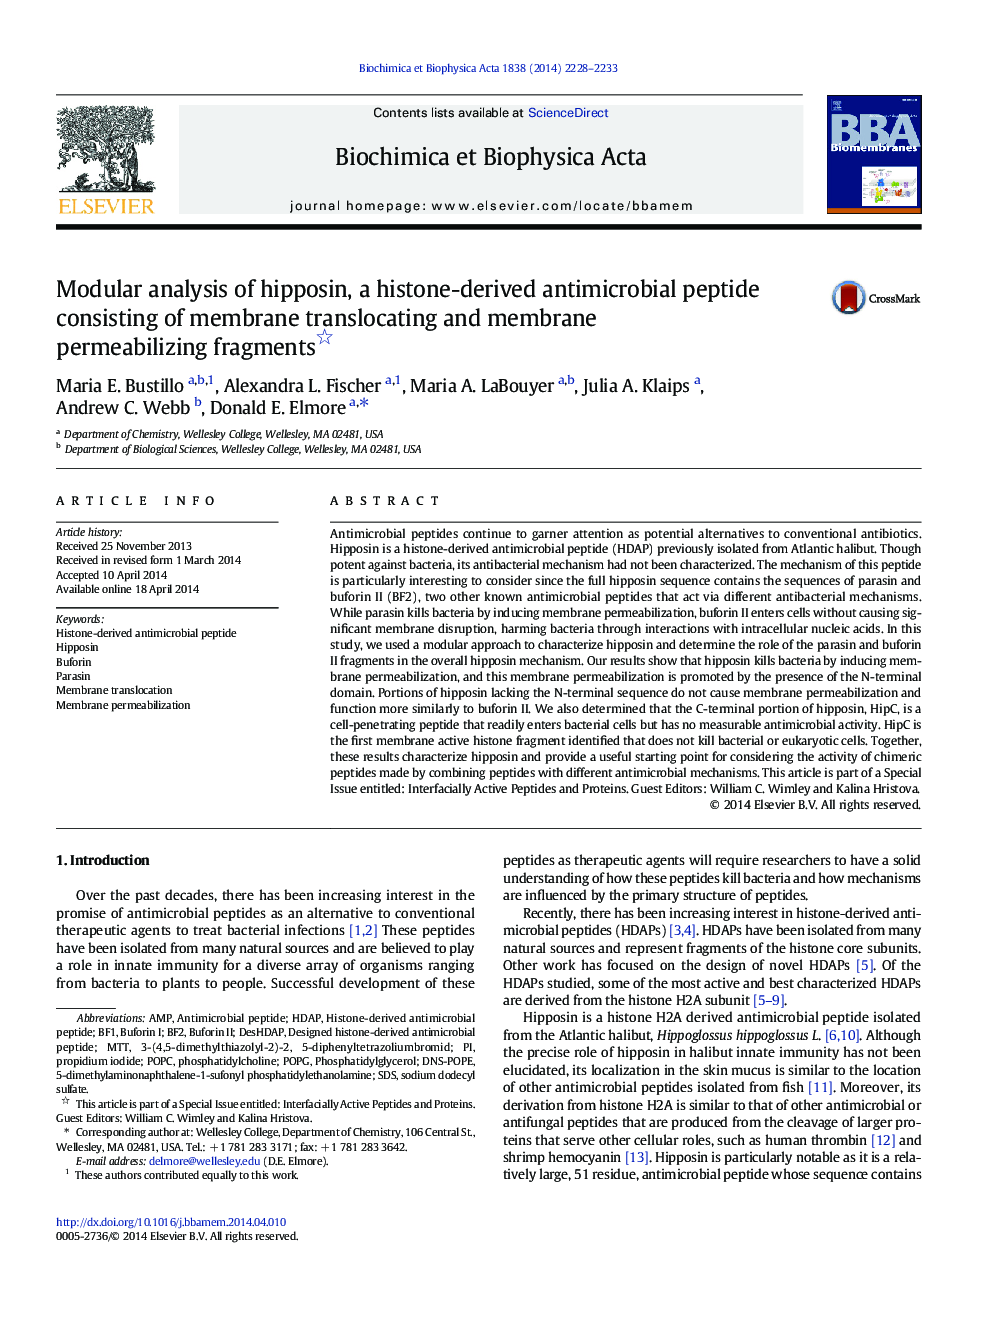 Modular analysis of hipposin, a histone-derived antimicrobial peptide consisting of membrane translocating and membrane permeabilizing fragments 